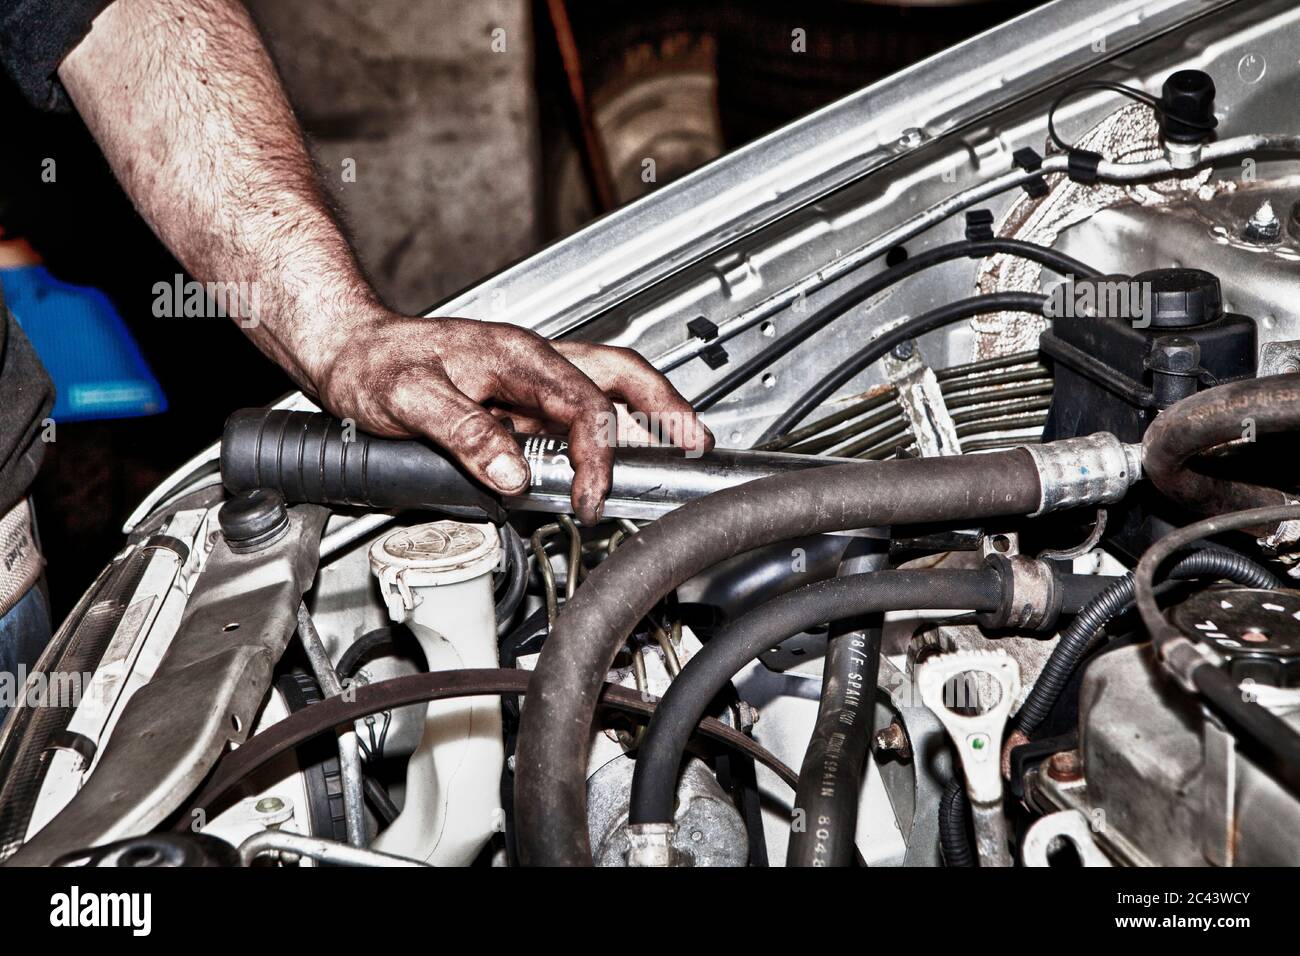 Auto mechanic on the open hood of a car Stock Photo